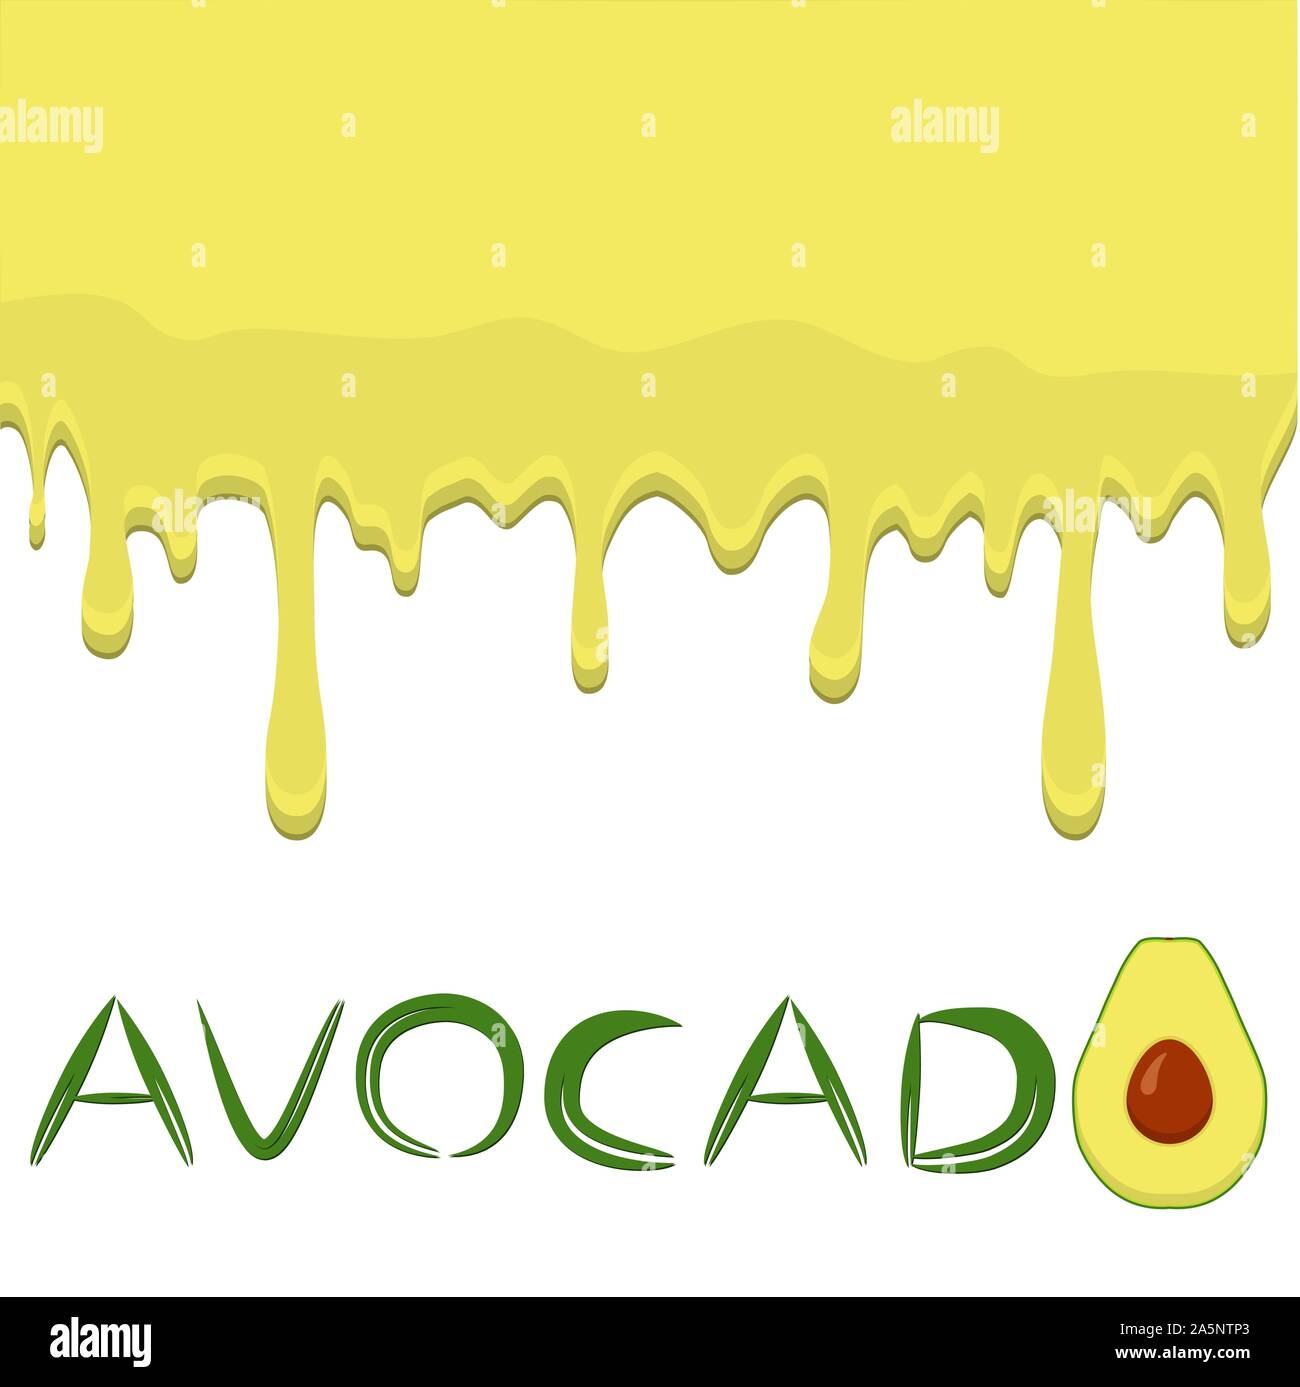 https://c8.alamy.com/comp/2A5NTP3/illustration-on-theme-falling-runny-avocado-drip-at-sugary-cow-milk-avocado-pattern-consisting-of-drip-meal-for-organic-healthy-milk-beverage-drip-a-2A5NTP3.jpg